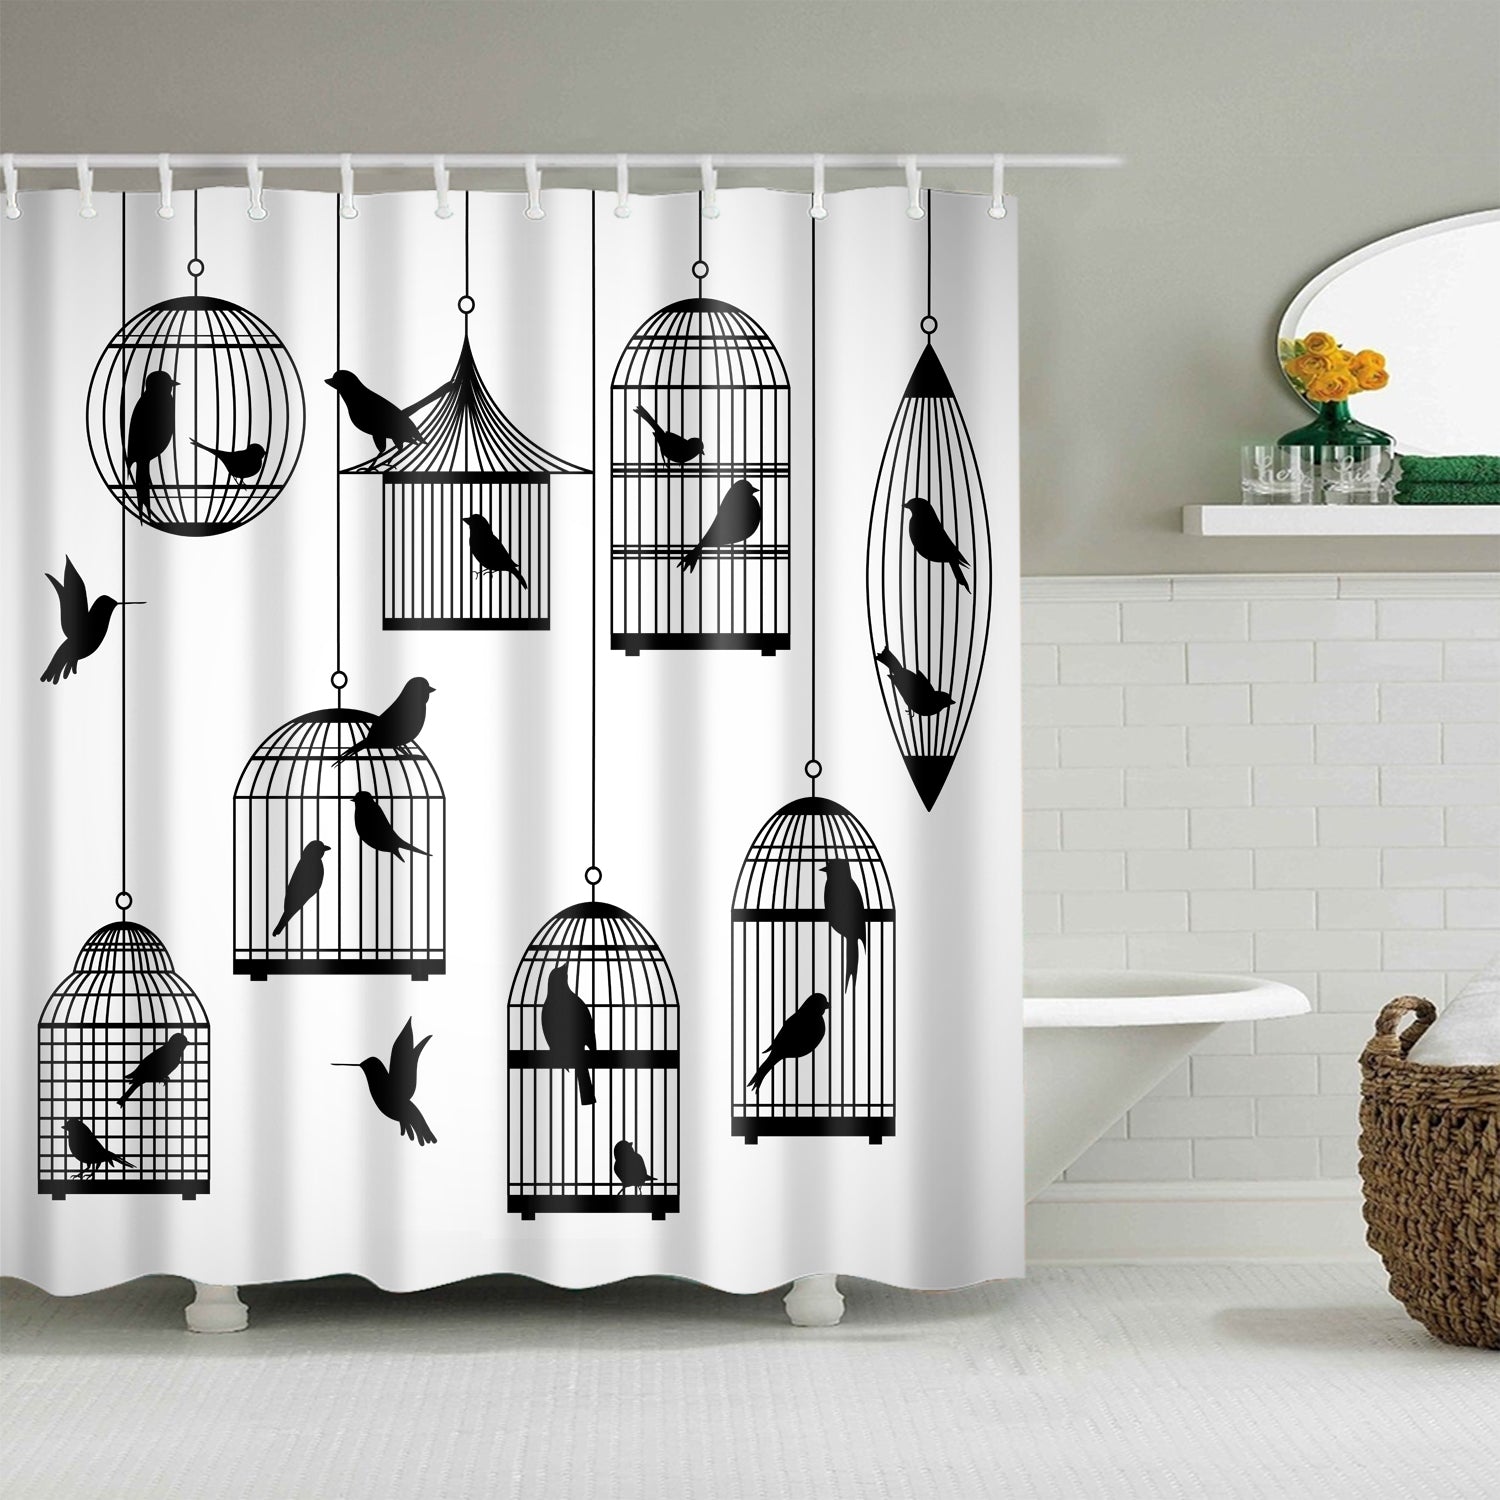 Black Domestic Canary Birdcage Shower Curtain